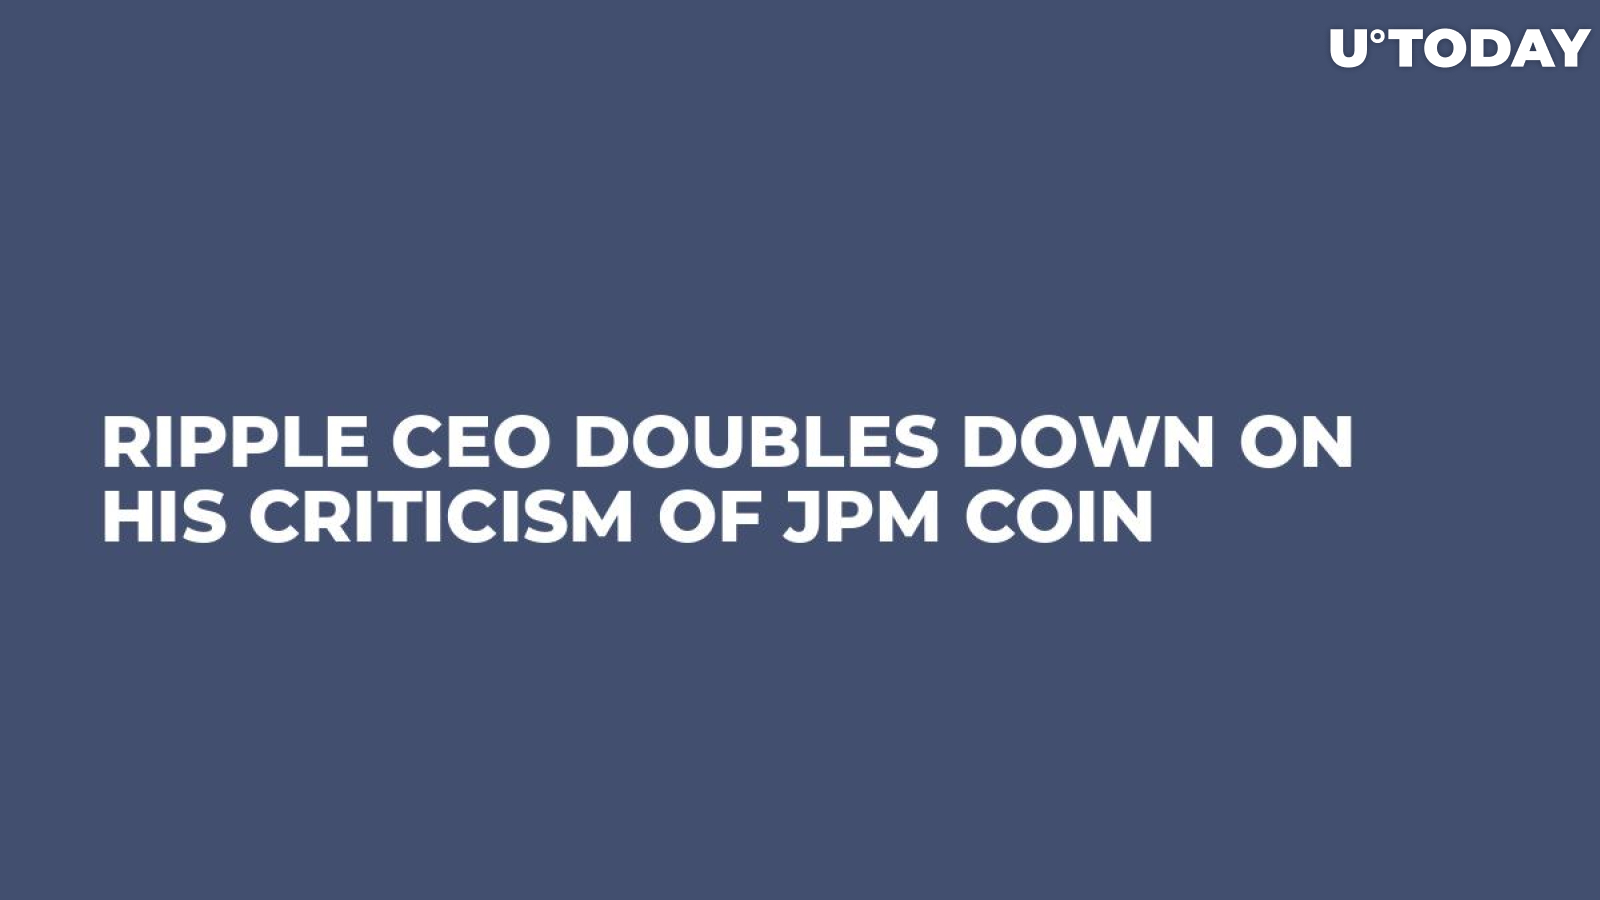 Ripple CEO Doubles Down on His Criticism of JPM Coin